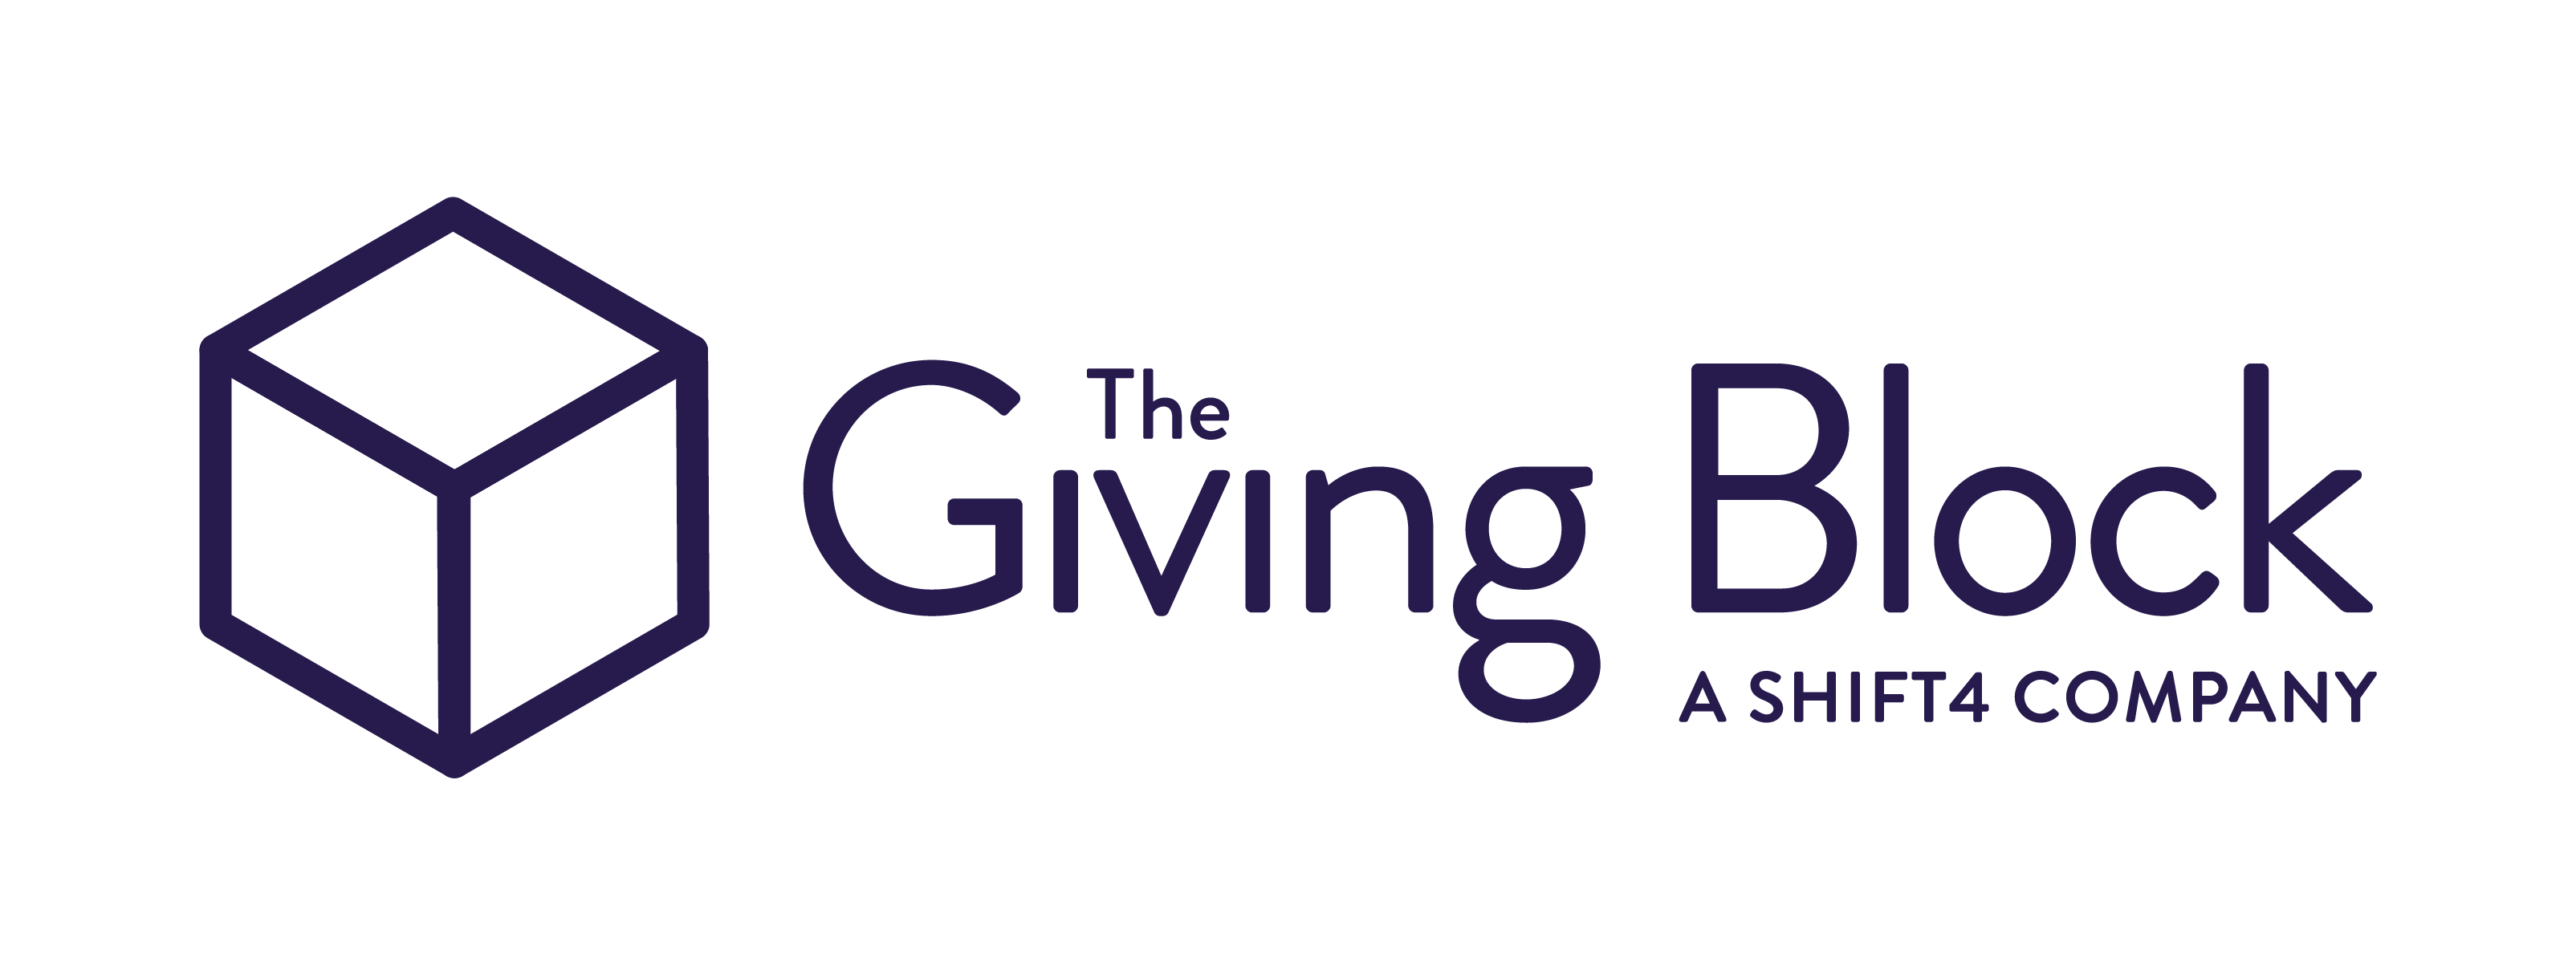 The Giving Block One Color_Logo on Light - Monochrome - Brand